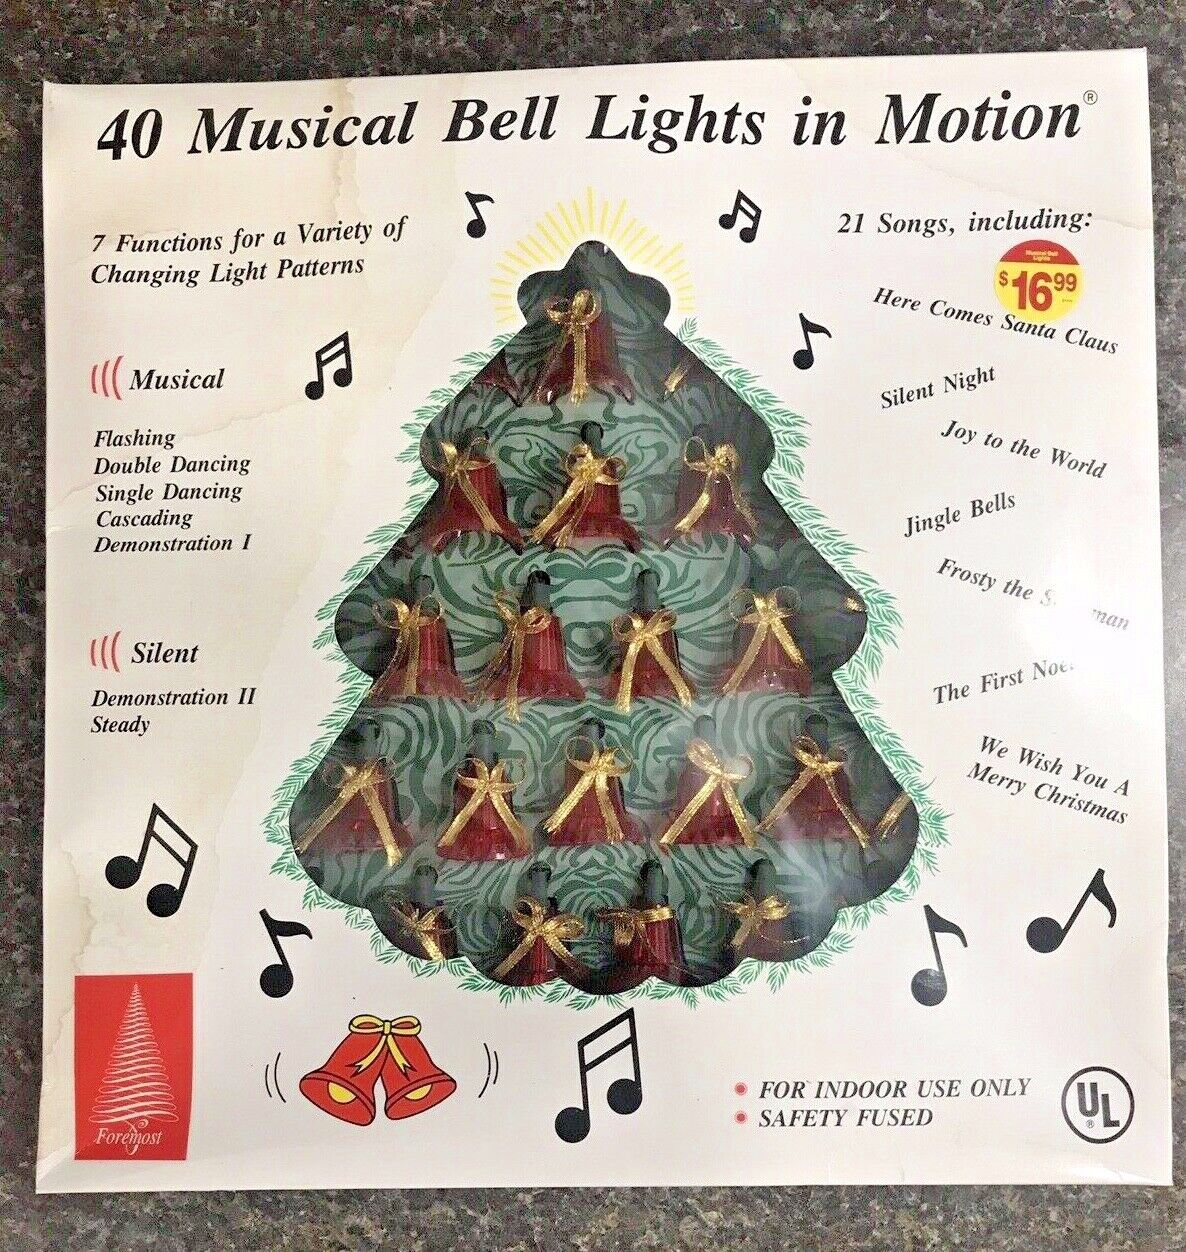 Vintage 40 Musical Bell Lights In Motion 21 Songs 7 Functions Changing Patterns 